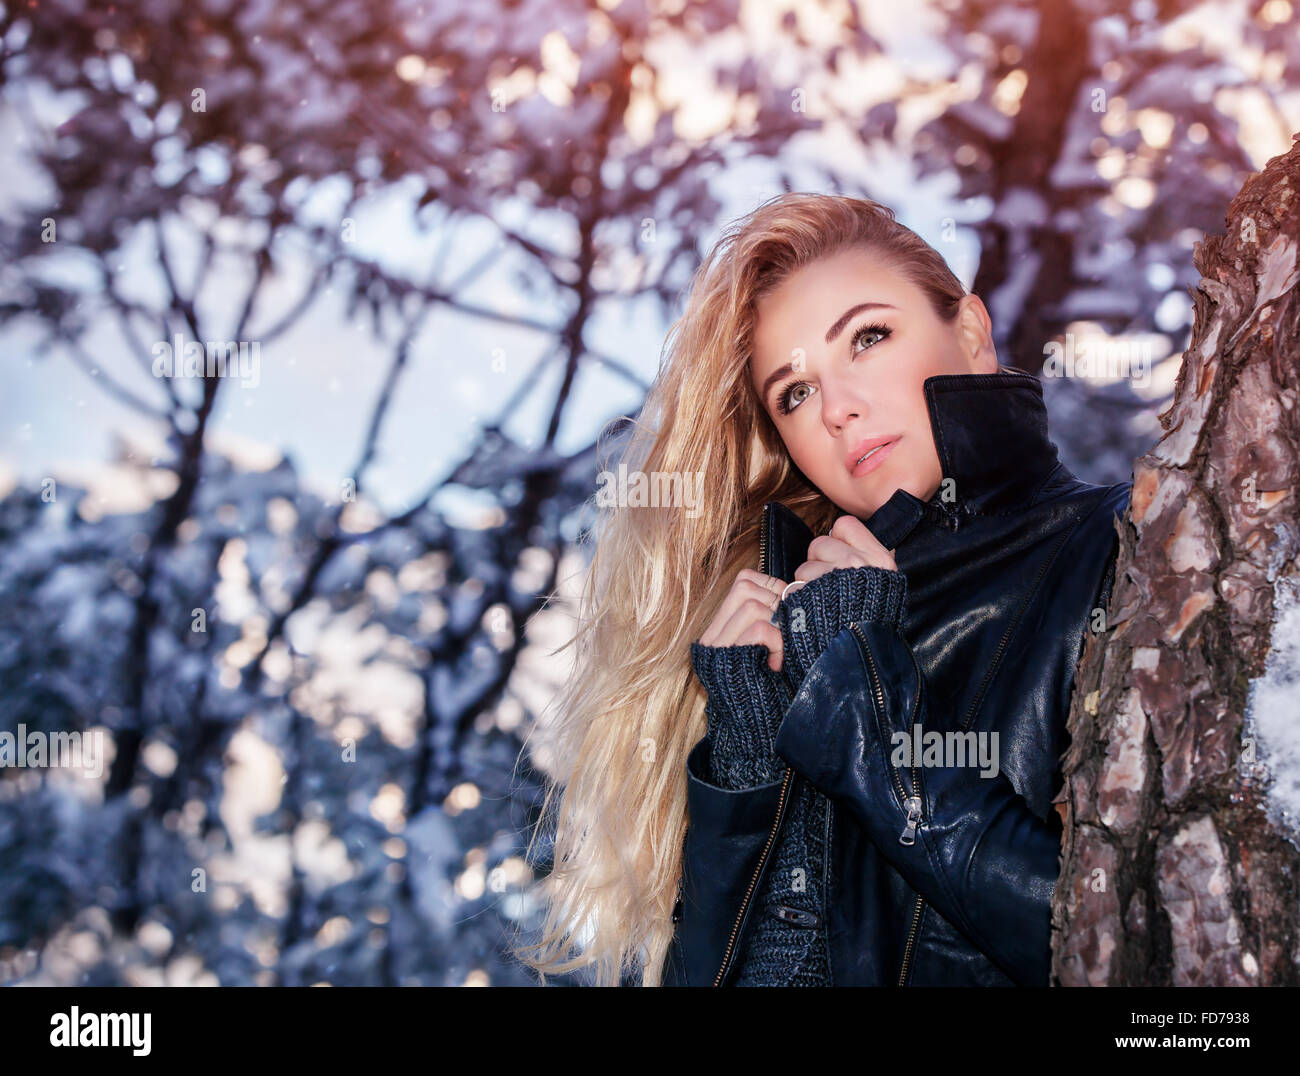 Portrait of beautiful blond woman standing near tree in the winter park, fashionable clothing, gorgeous model posing outdoors Stock Photo